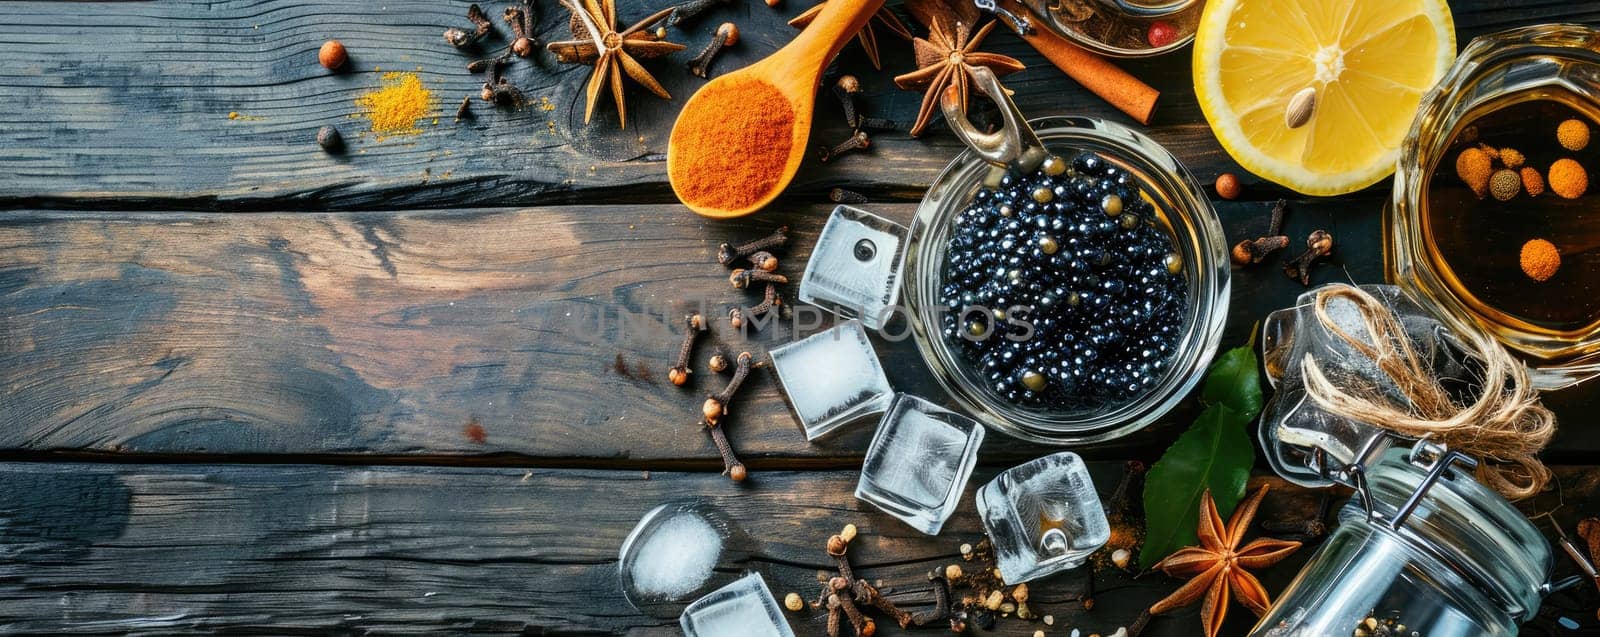 Banner with black caviar and spices on wooden background by Yurich32